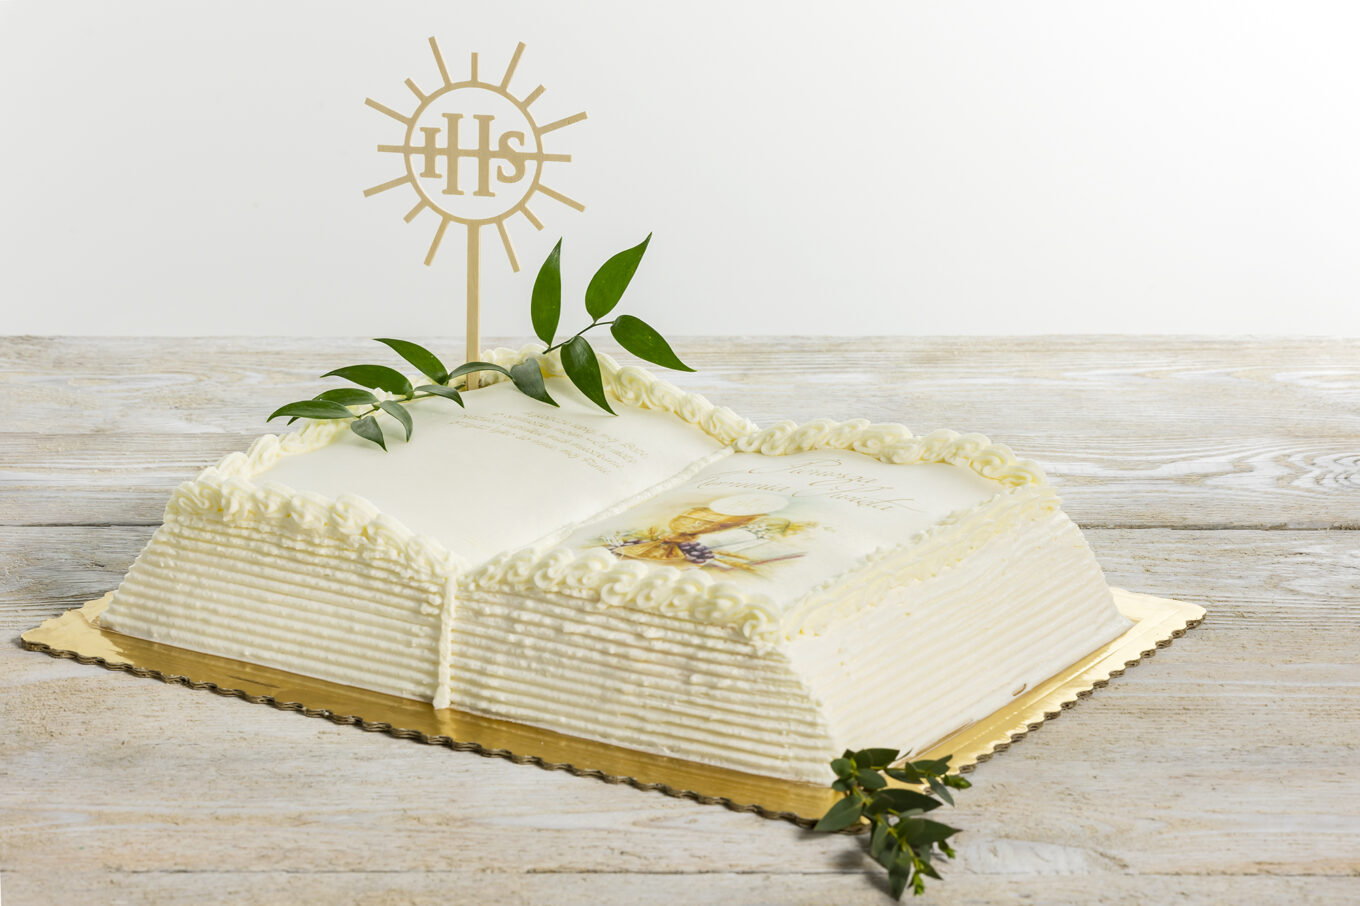 book cake for communion with topper Cukiernia Jacek Placek is synonymous with the taste of homemade cakes made of natural products.